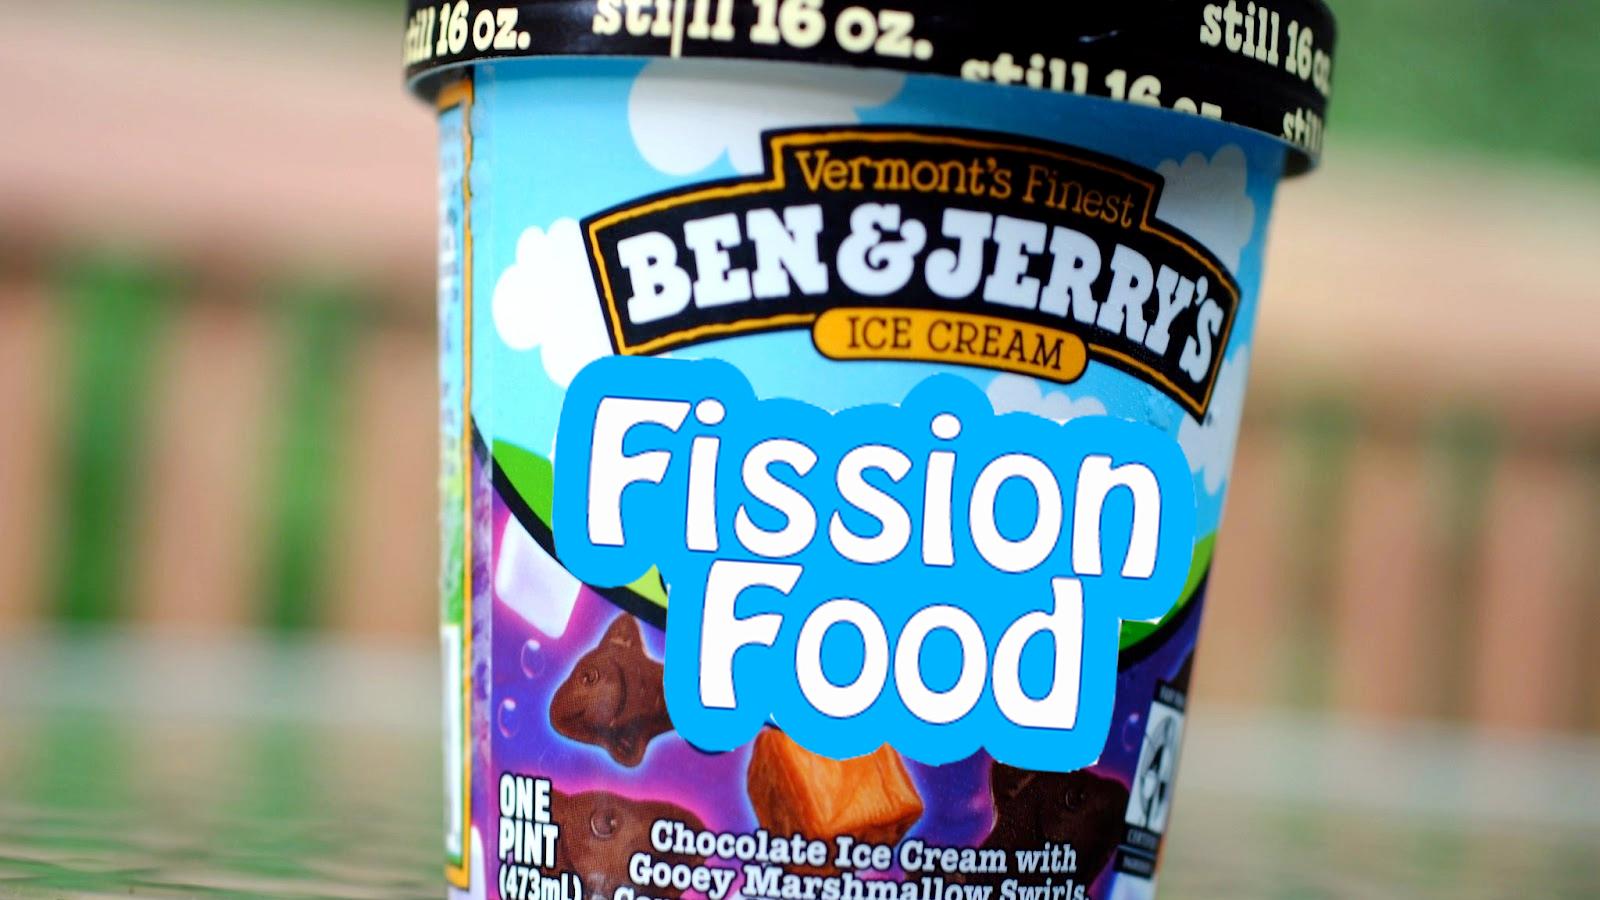 Reporter Daniel Estrin suggested Ben & Jerry create Fission Food - playing off of the classic "Phish Food" flavor